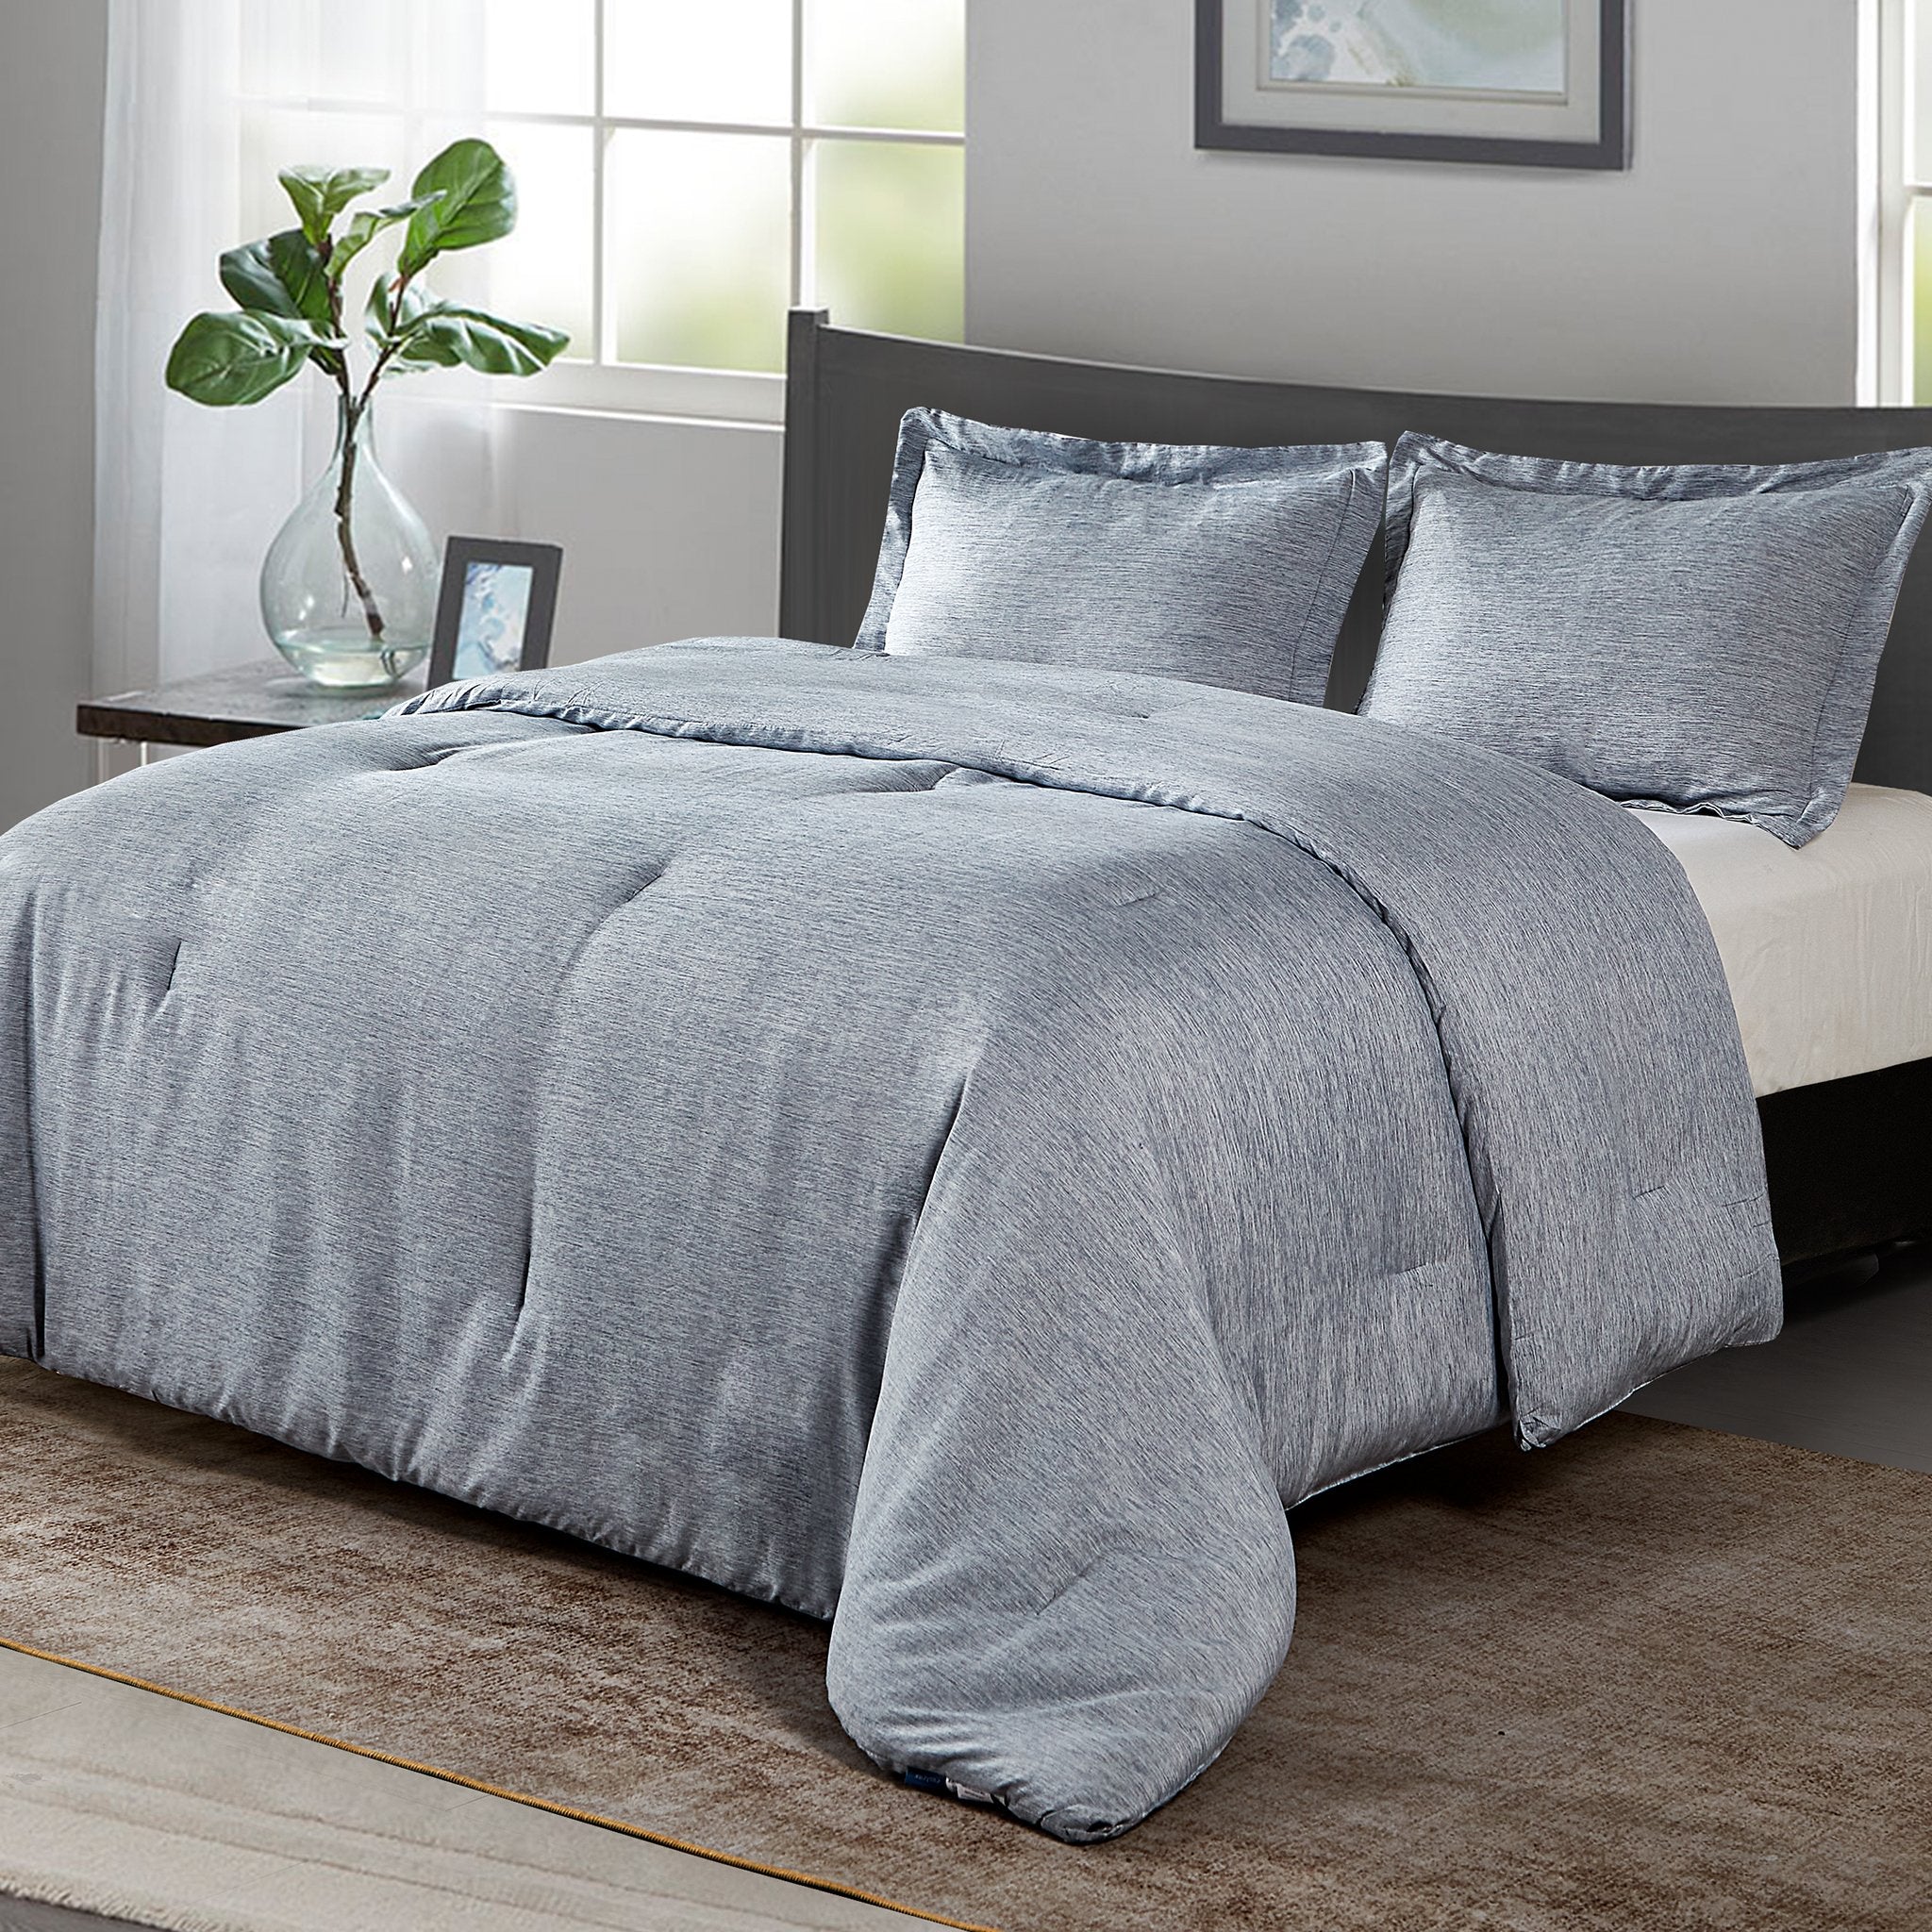 CozyLux Queen Size Comforter Set - 3 Pieces Grey Soft Luxury Cationic  Dyeing Bedding Comforter for All Season, Gray Breathable Lightweight Fluffy  Bed